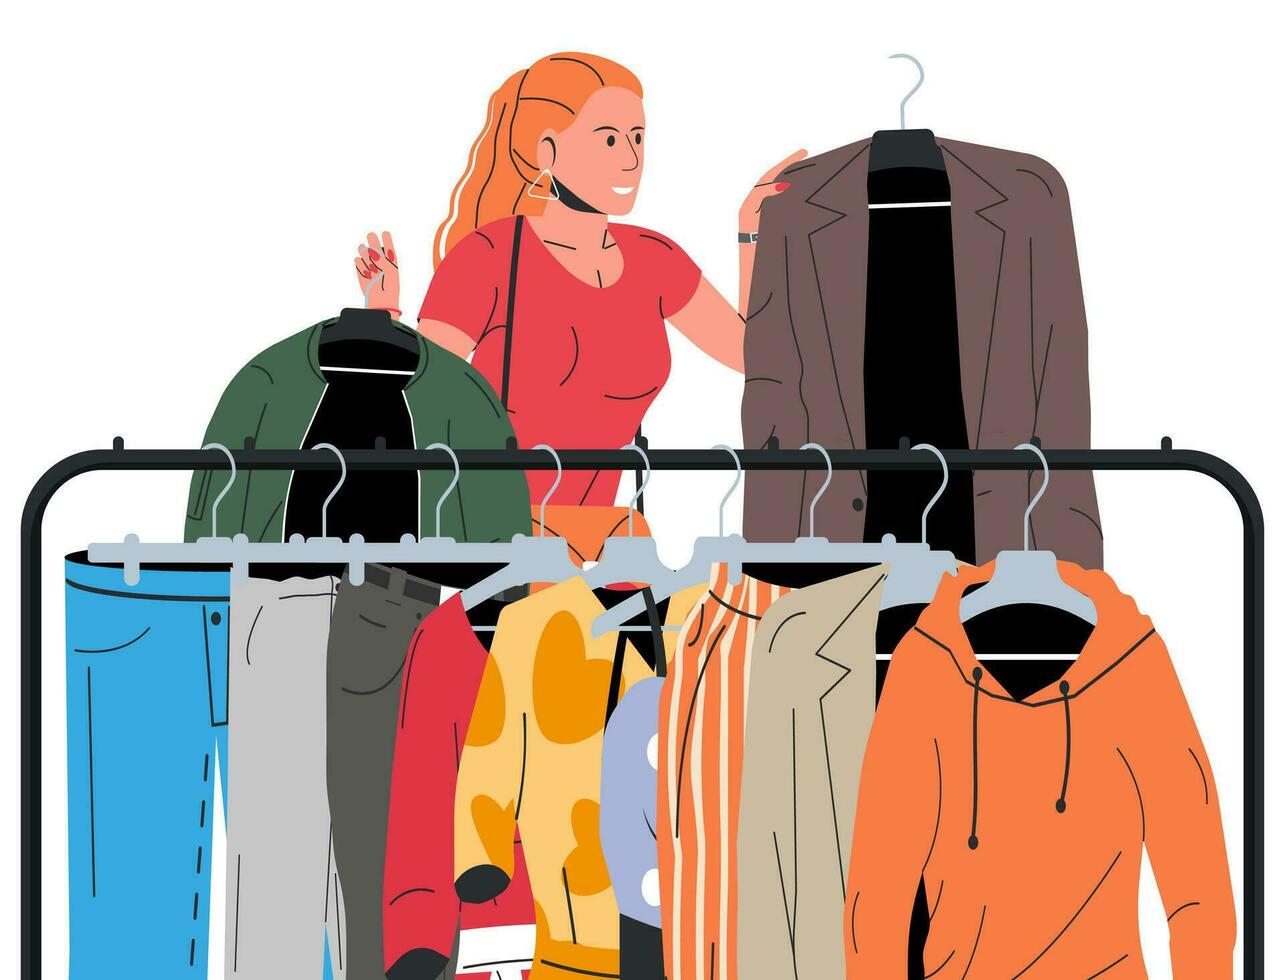 Woman Near Rack with Clothes. Womens Clothes on Hanger. Home or Shop Wardrobe. Clothes and Accessories. Various Hanging Clothing. Jacket, Shirt, Jeans, Pants. Cartoon Flat Vector Illustration